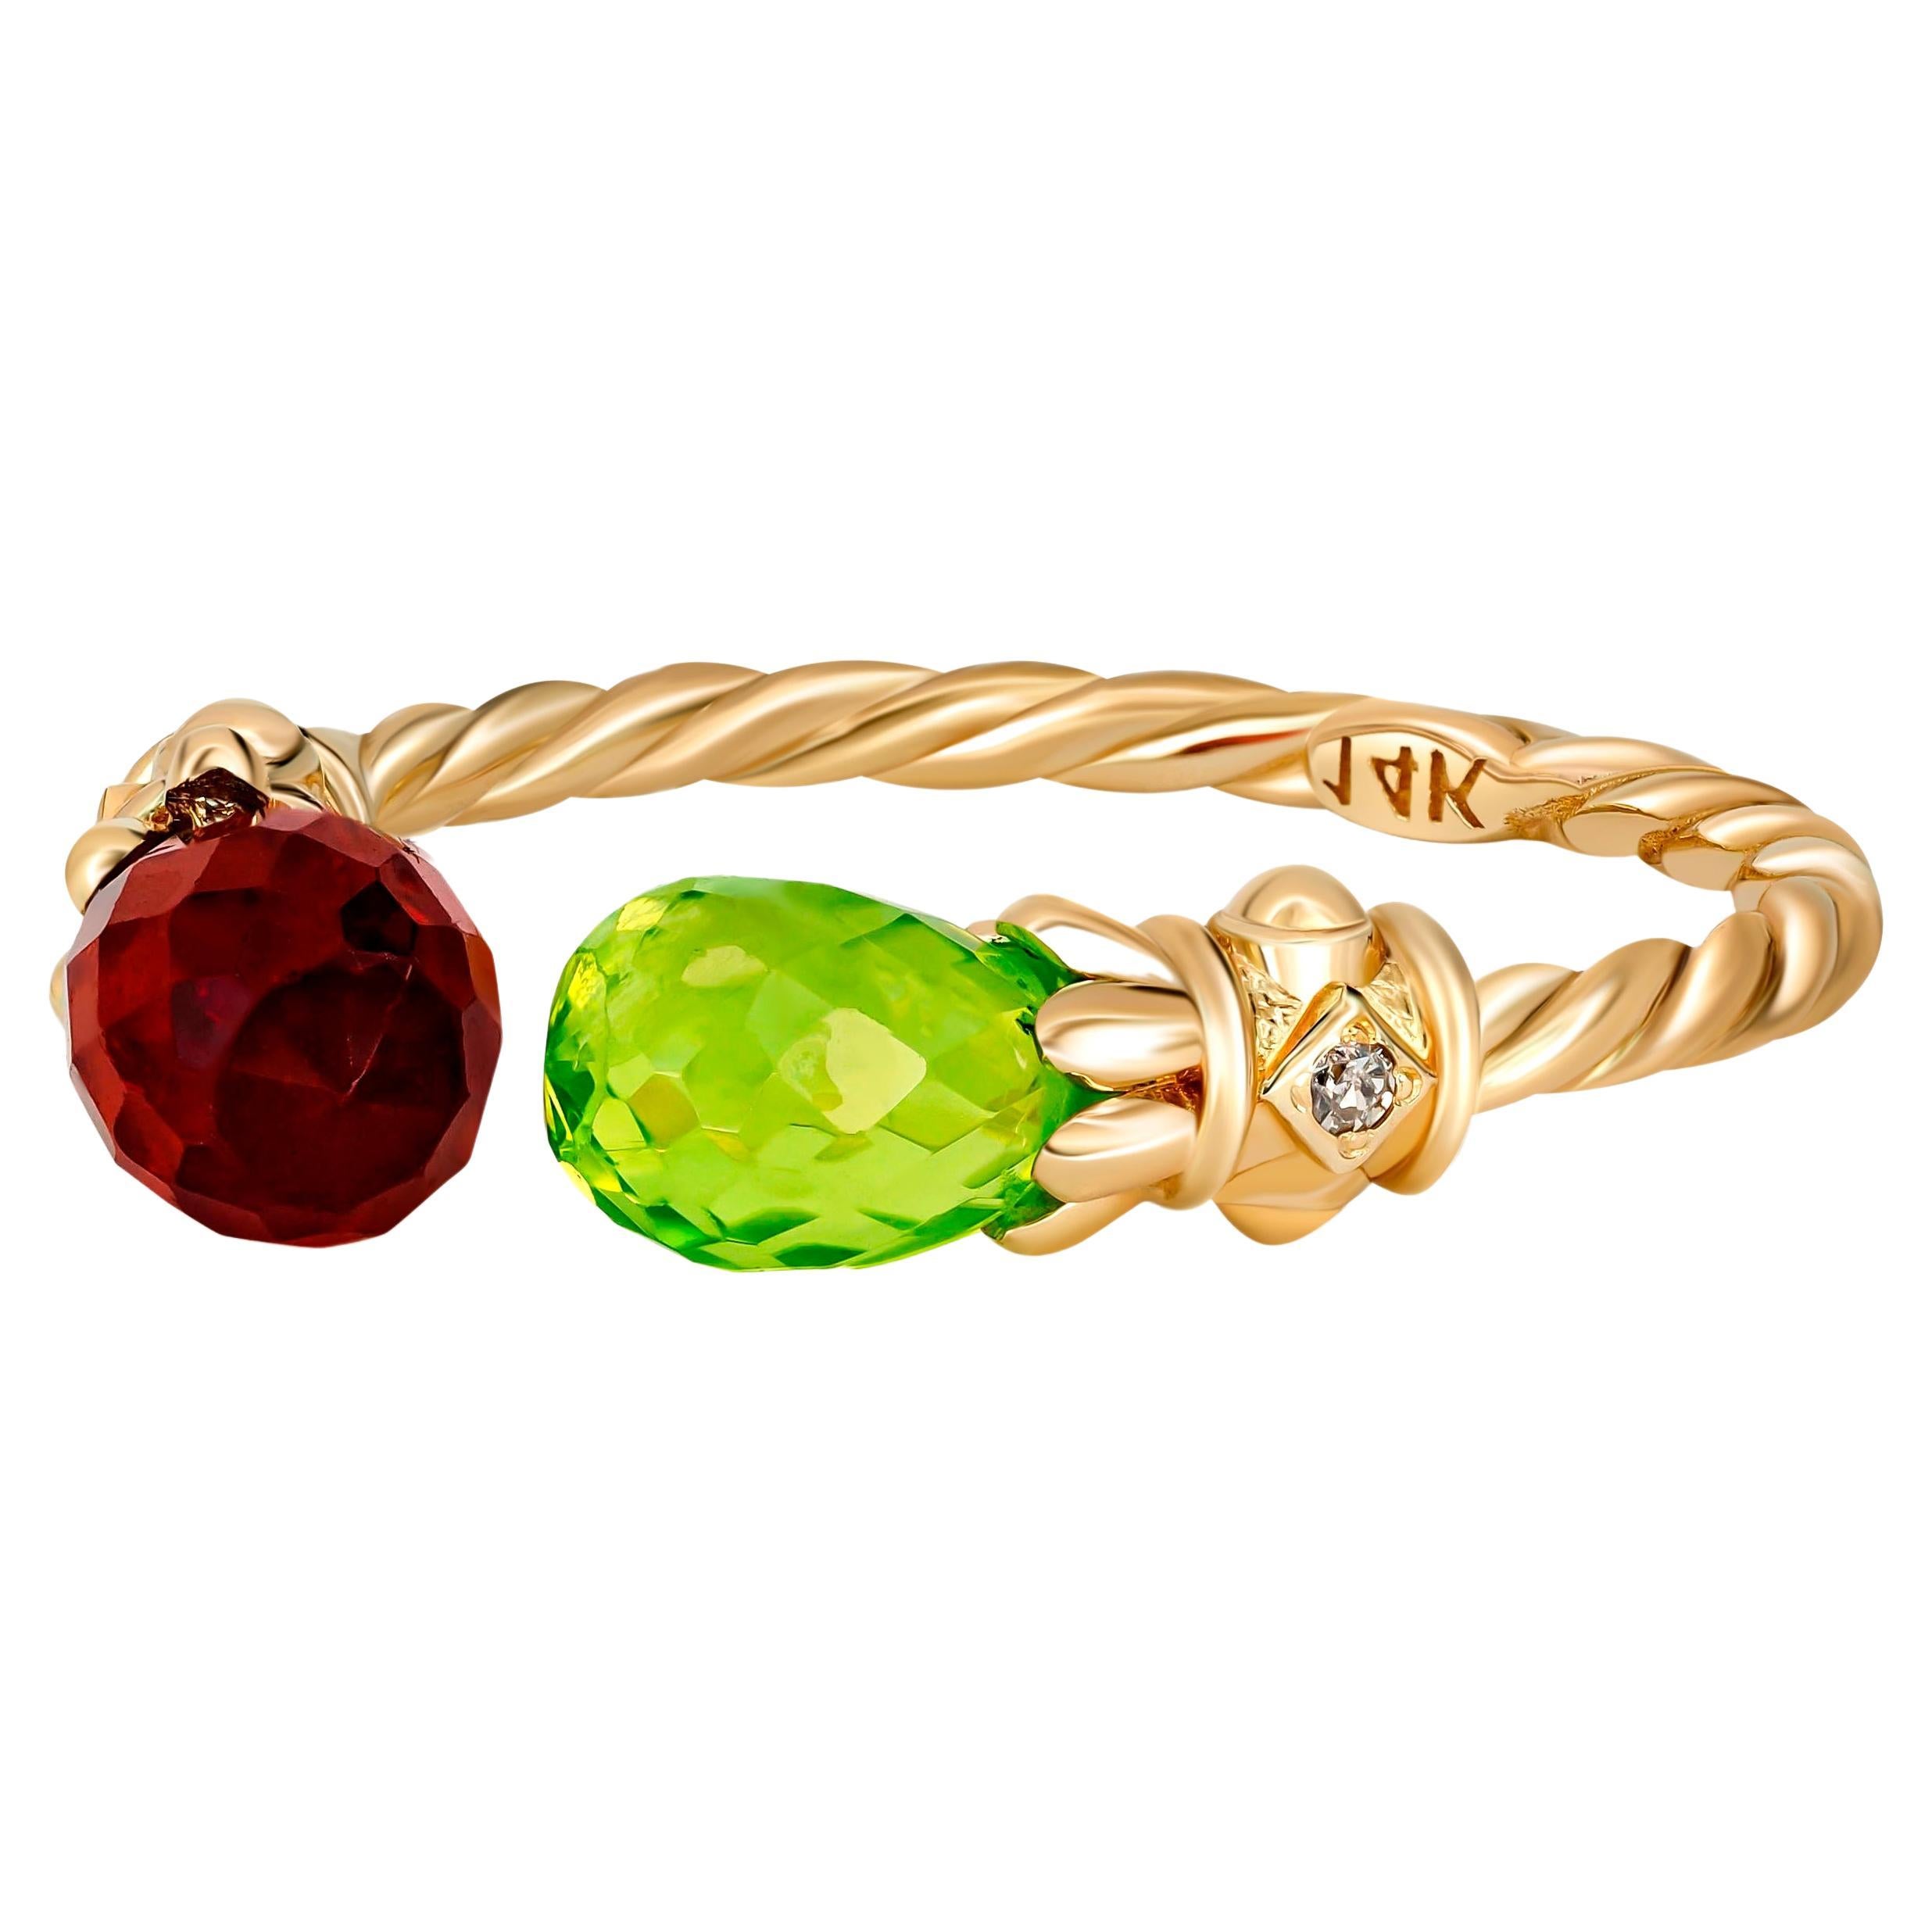 For Sale:   Open ended gold ring with peridot, garnet and diamonds